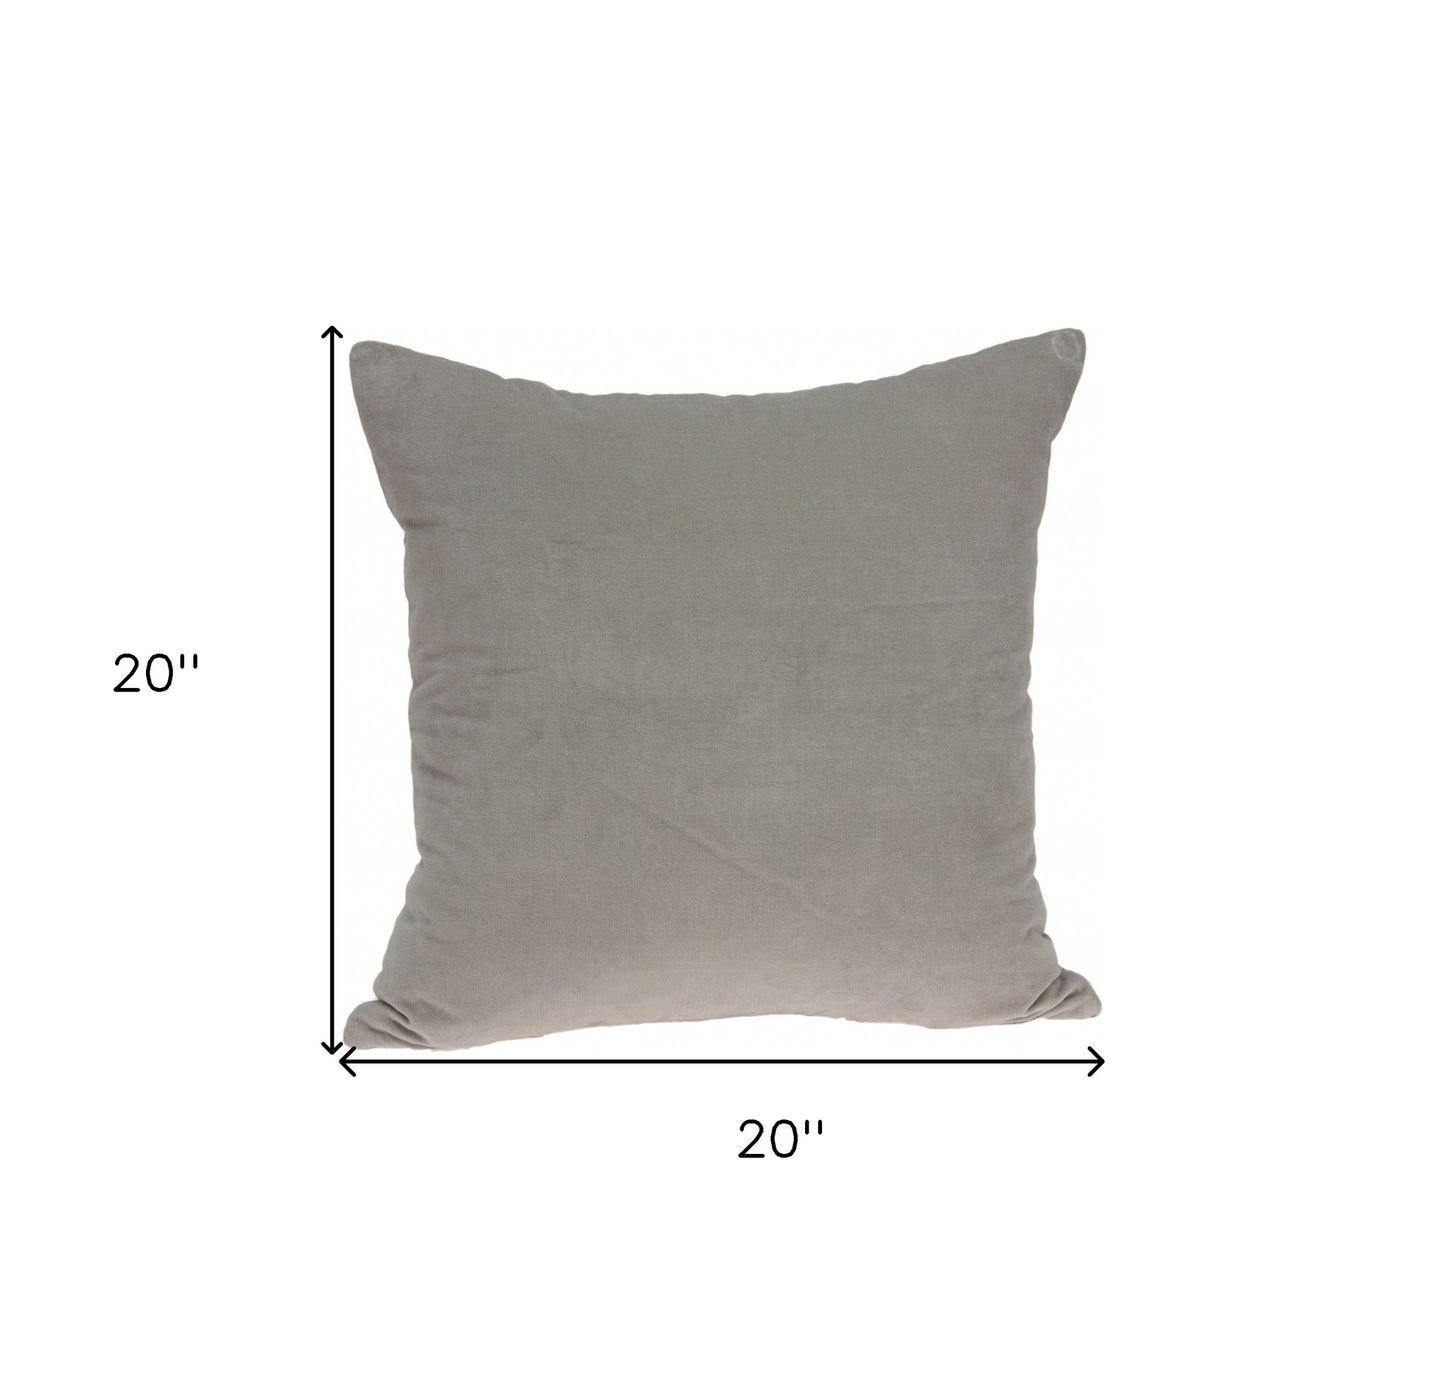 20" X 7" X 20" Transitional Gray Solid Pillow Cover With Poly Insert